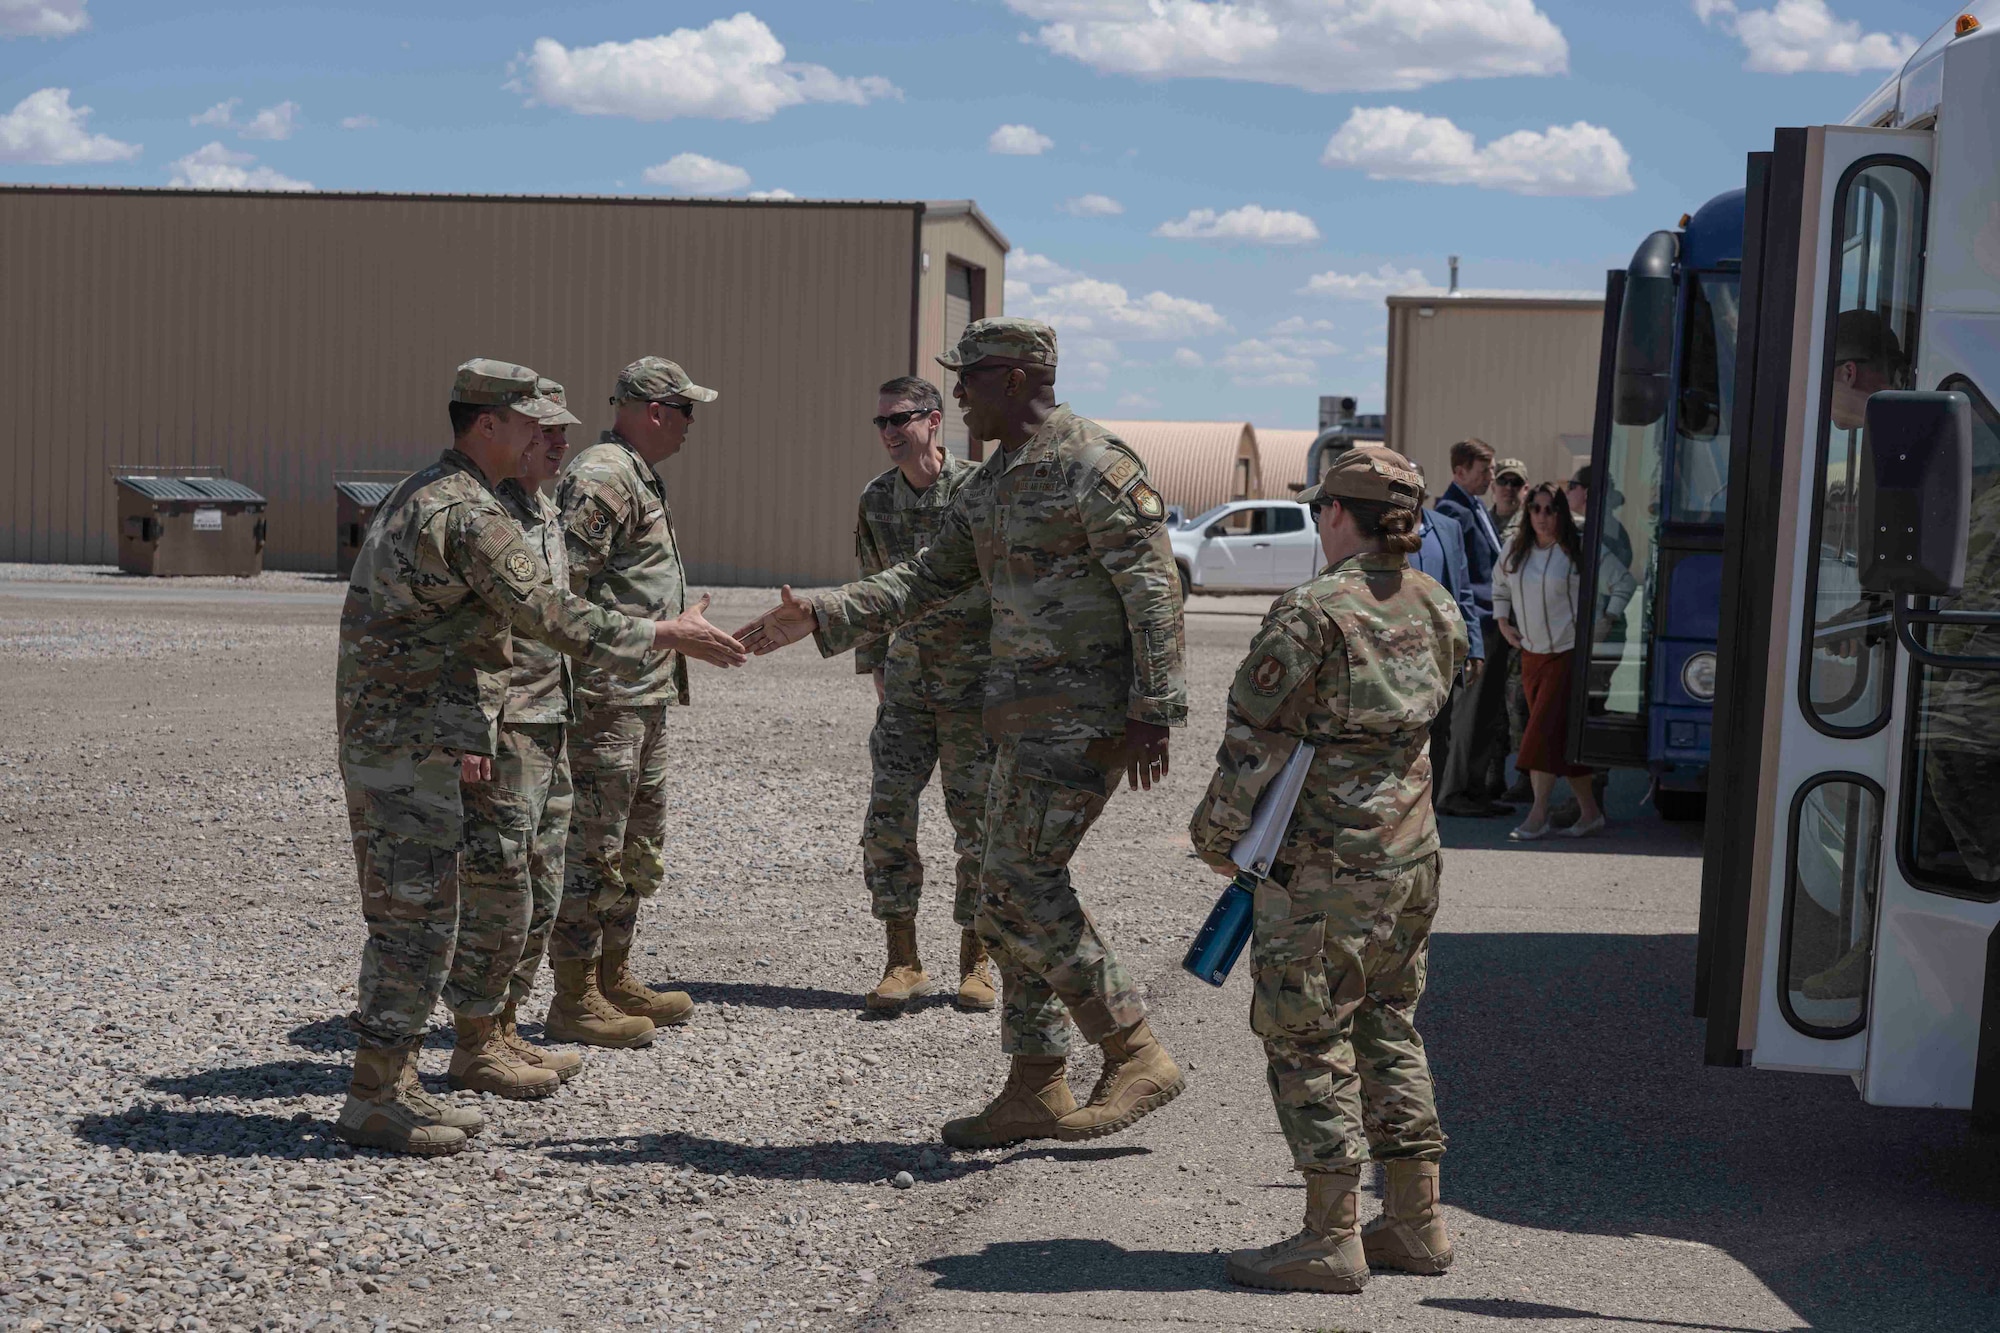 U.S. Air Force Lt. Gen. Stacey Hawkins, U.S. Air Force Sustainment Center commander, greets Airmen from the 635th Materiel Maintenance Group at Holloman Air Force Base, New Mexico, May 23, 2023. Hawkins and other senior leadership were given a familiarization tour of the 635th MMG to learn about their mission readiness capabilities. (U.S. Air Force photo by Senior Airman Antonio Salfran)